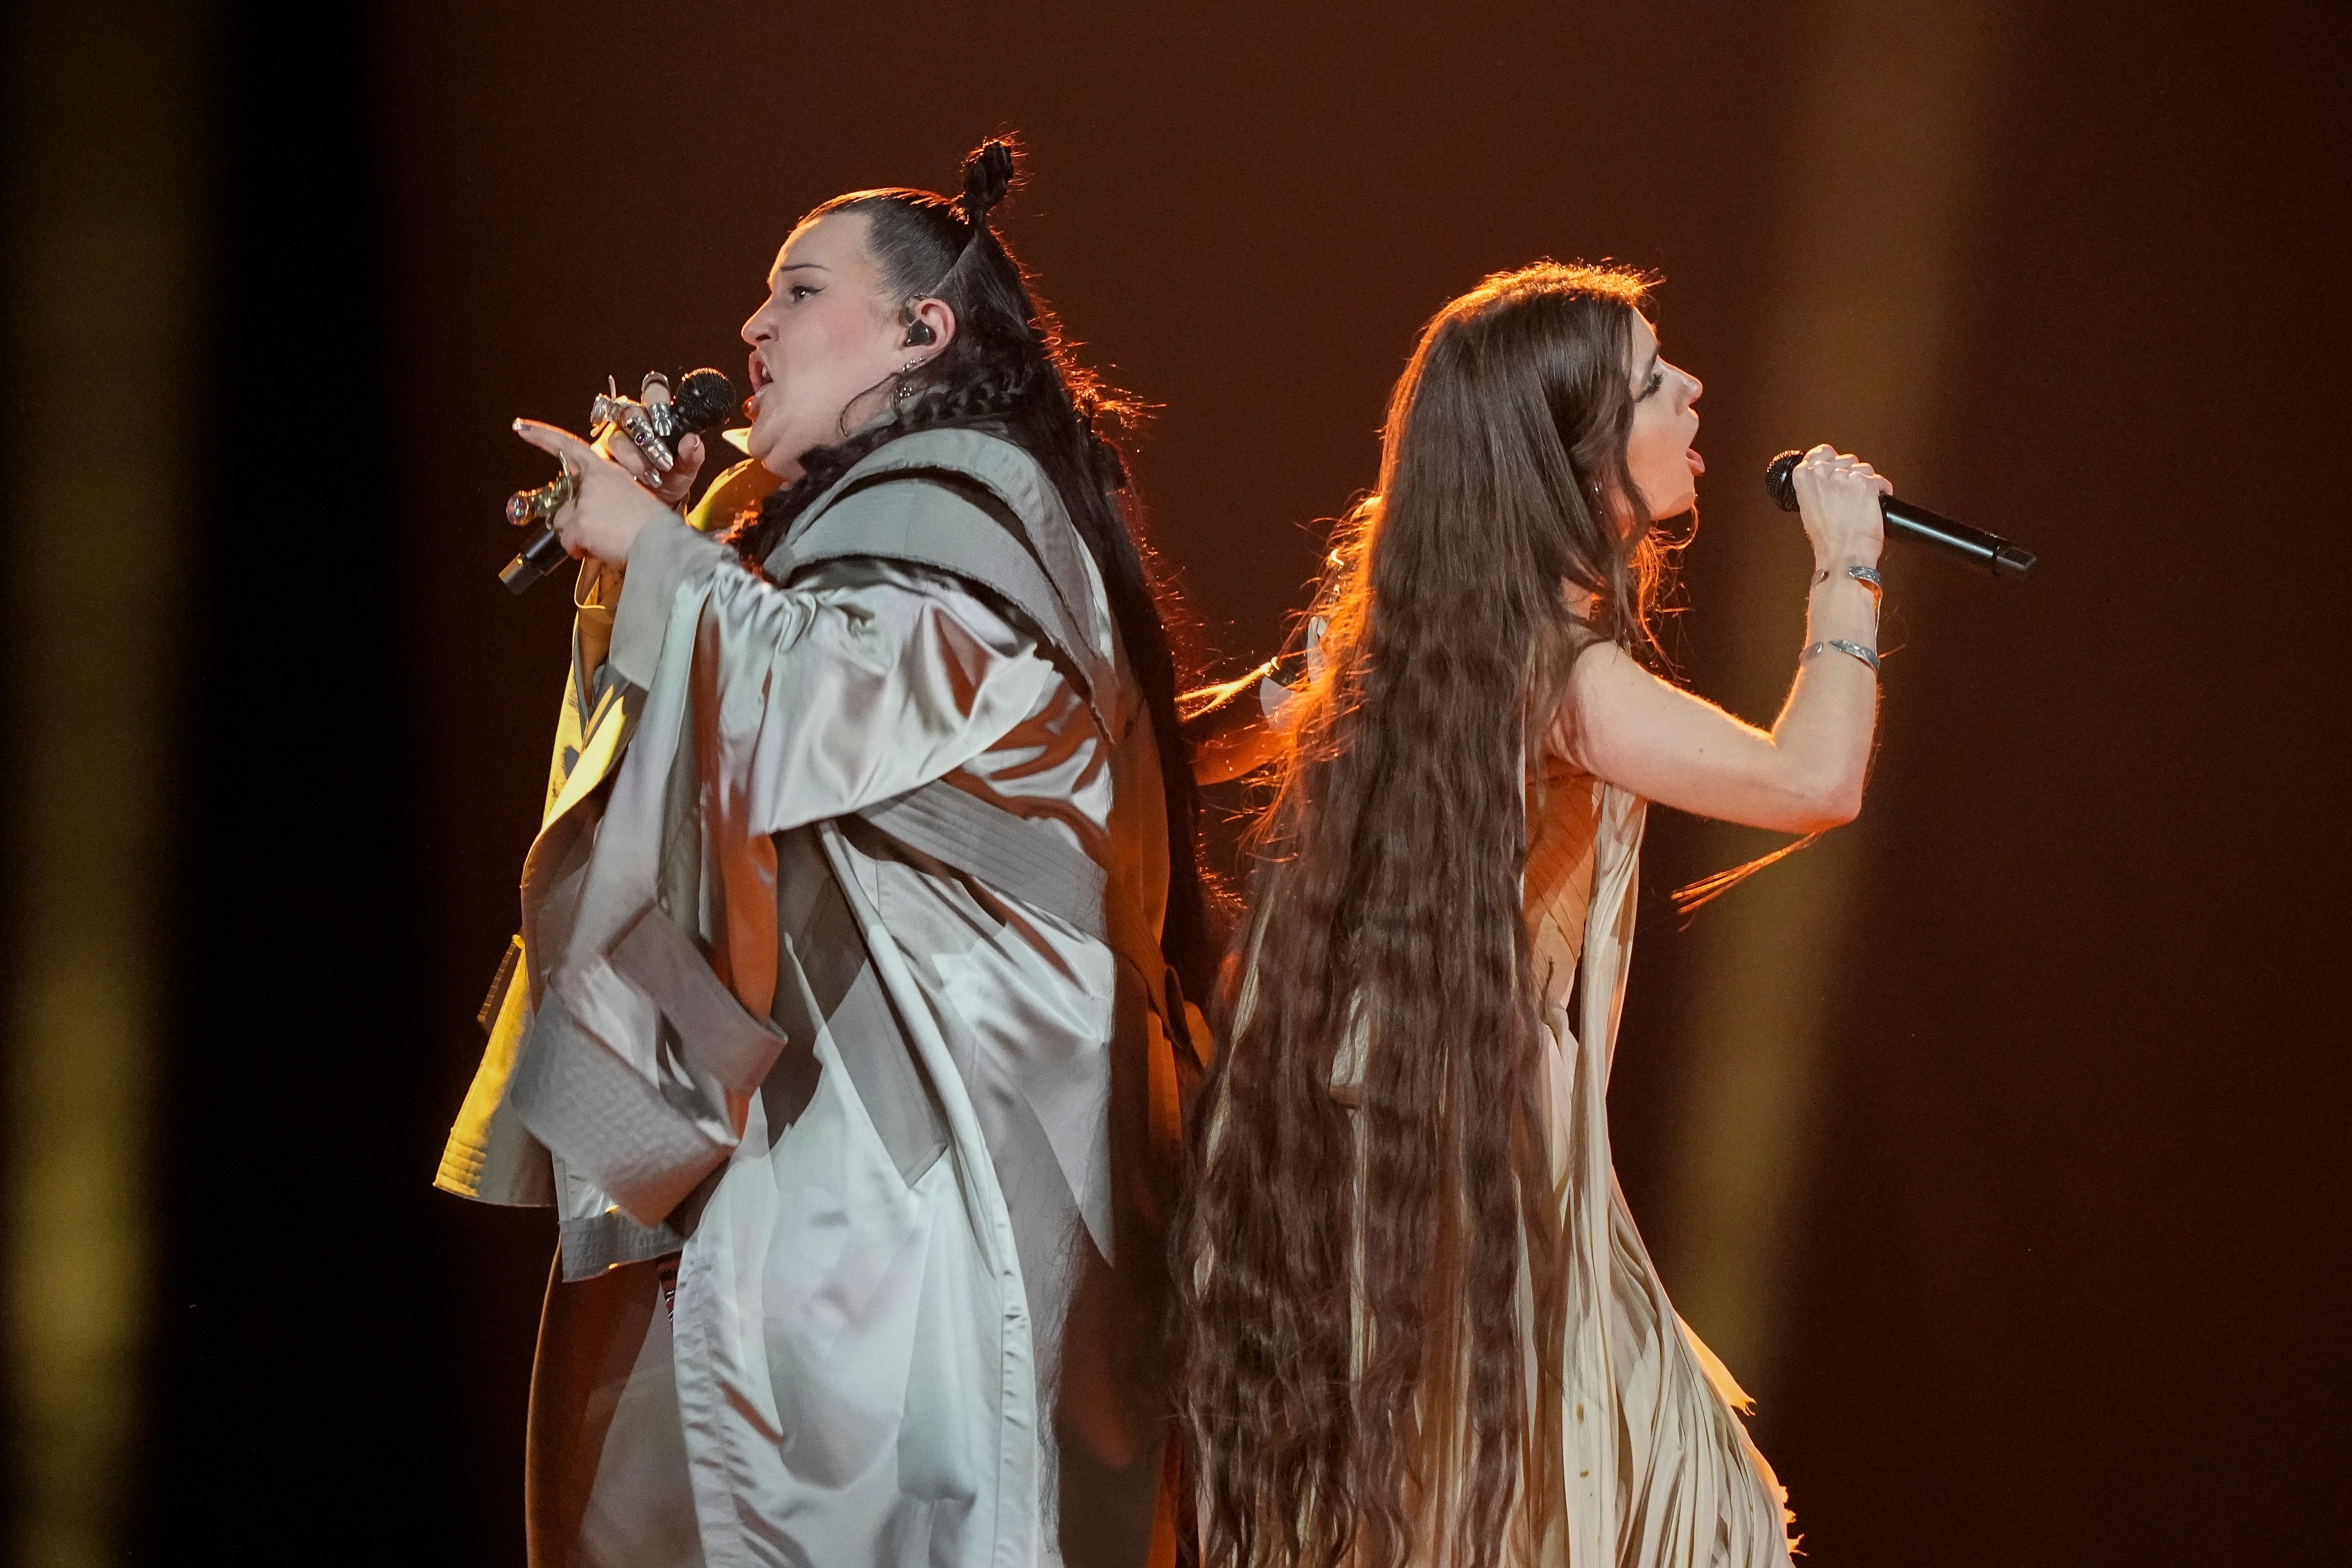 Alyona Alyona (left) and Jerry Heil perform during a Eurovision dress rehearsal